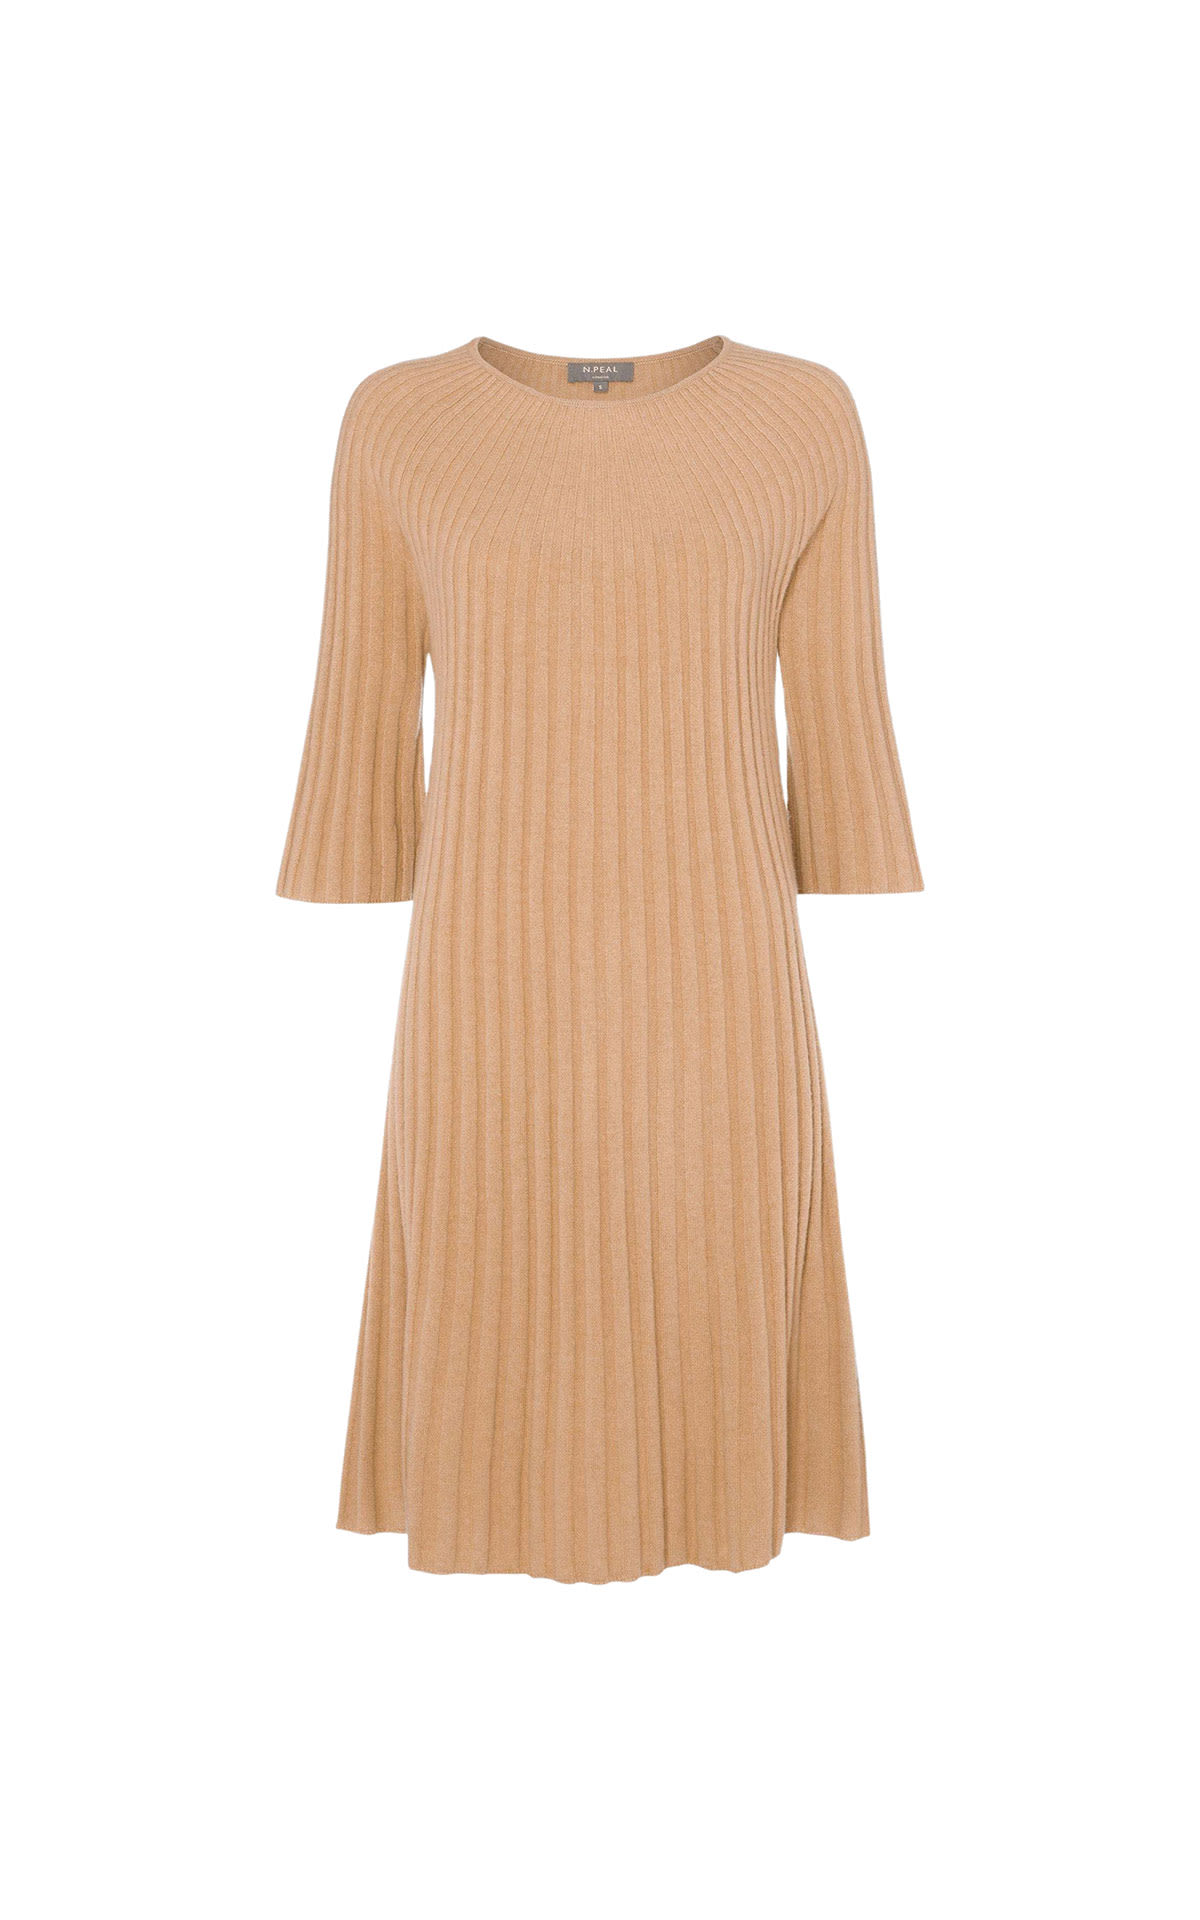 N.Peal Ribbed tunic dress from Bicester Village